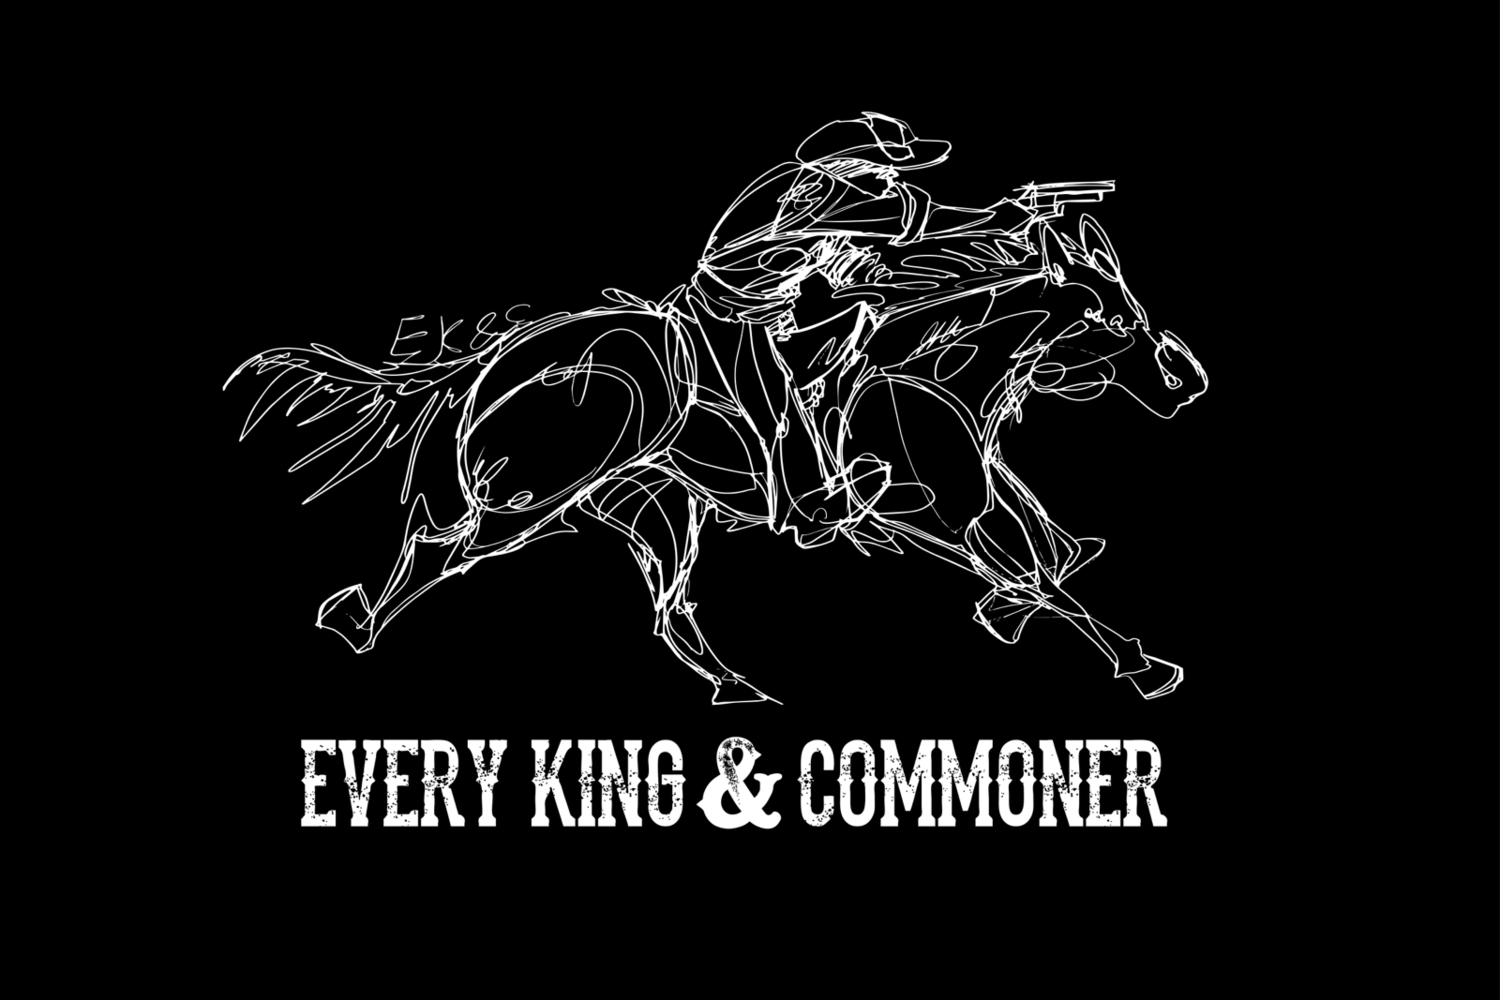 Every King & Commoner